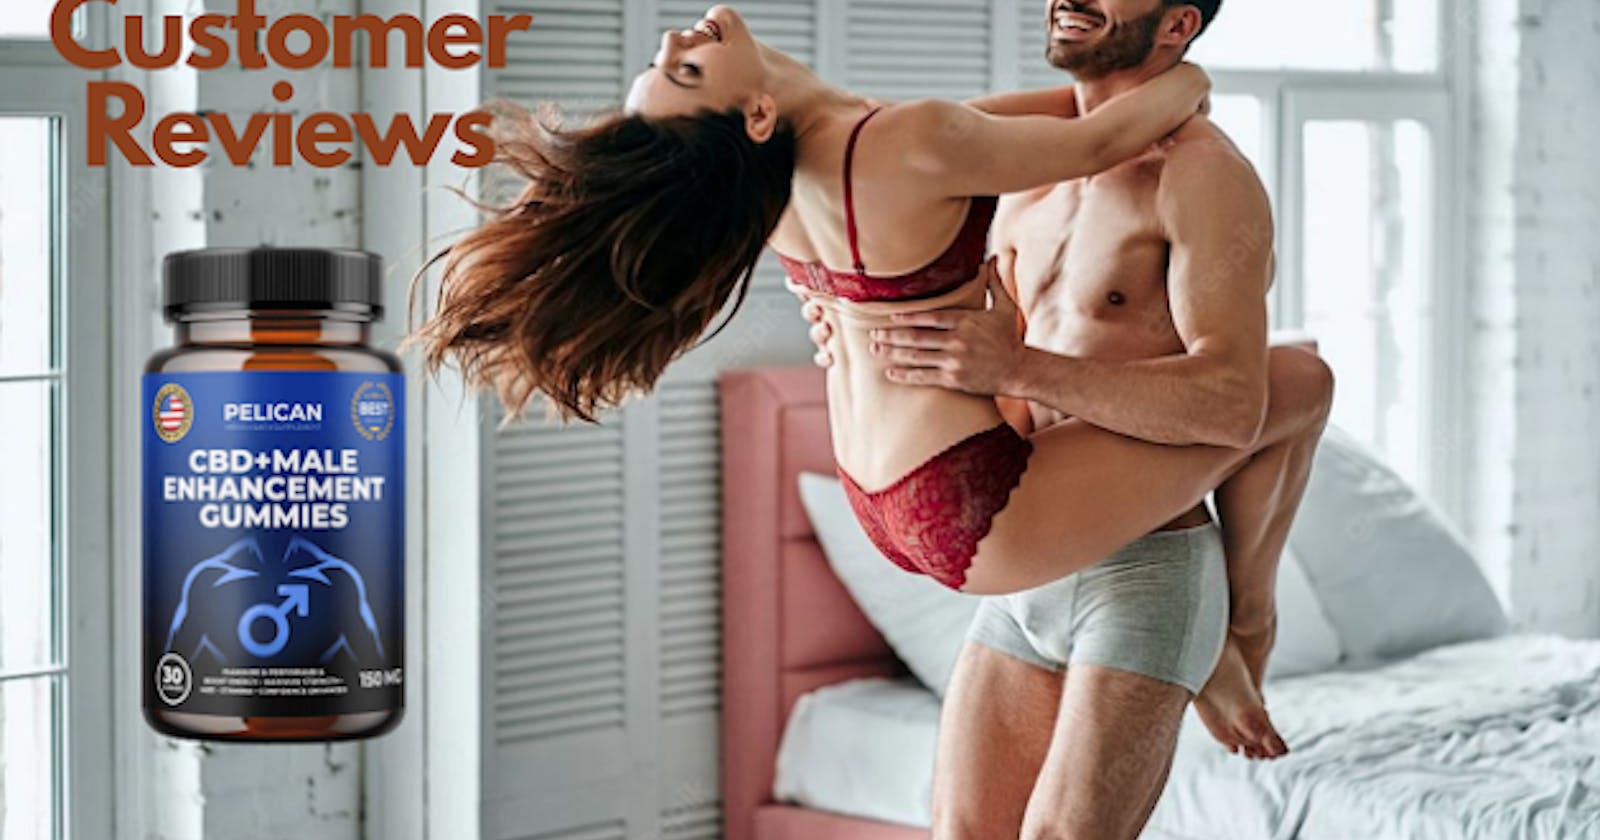 Gladiator Male Enhancement Boost Sexual Performance, Stamina & Power! Best Reviews, Results, Where To Buy?